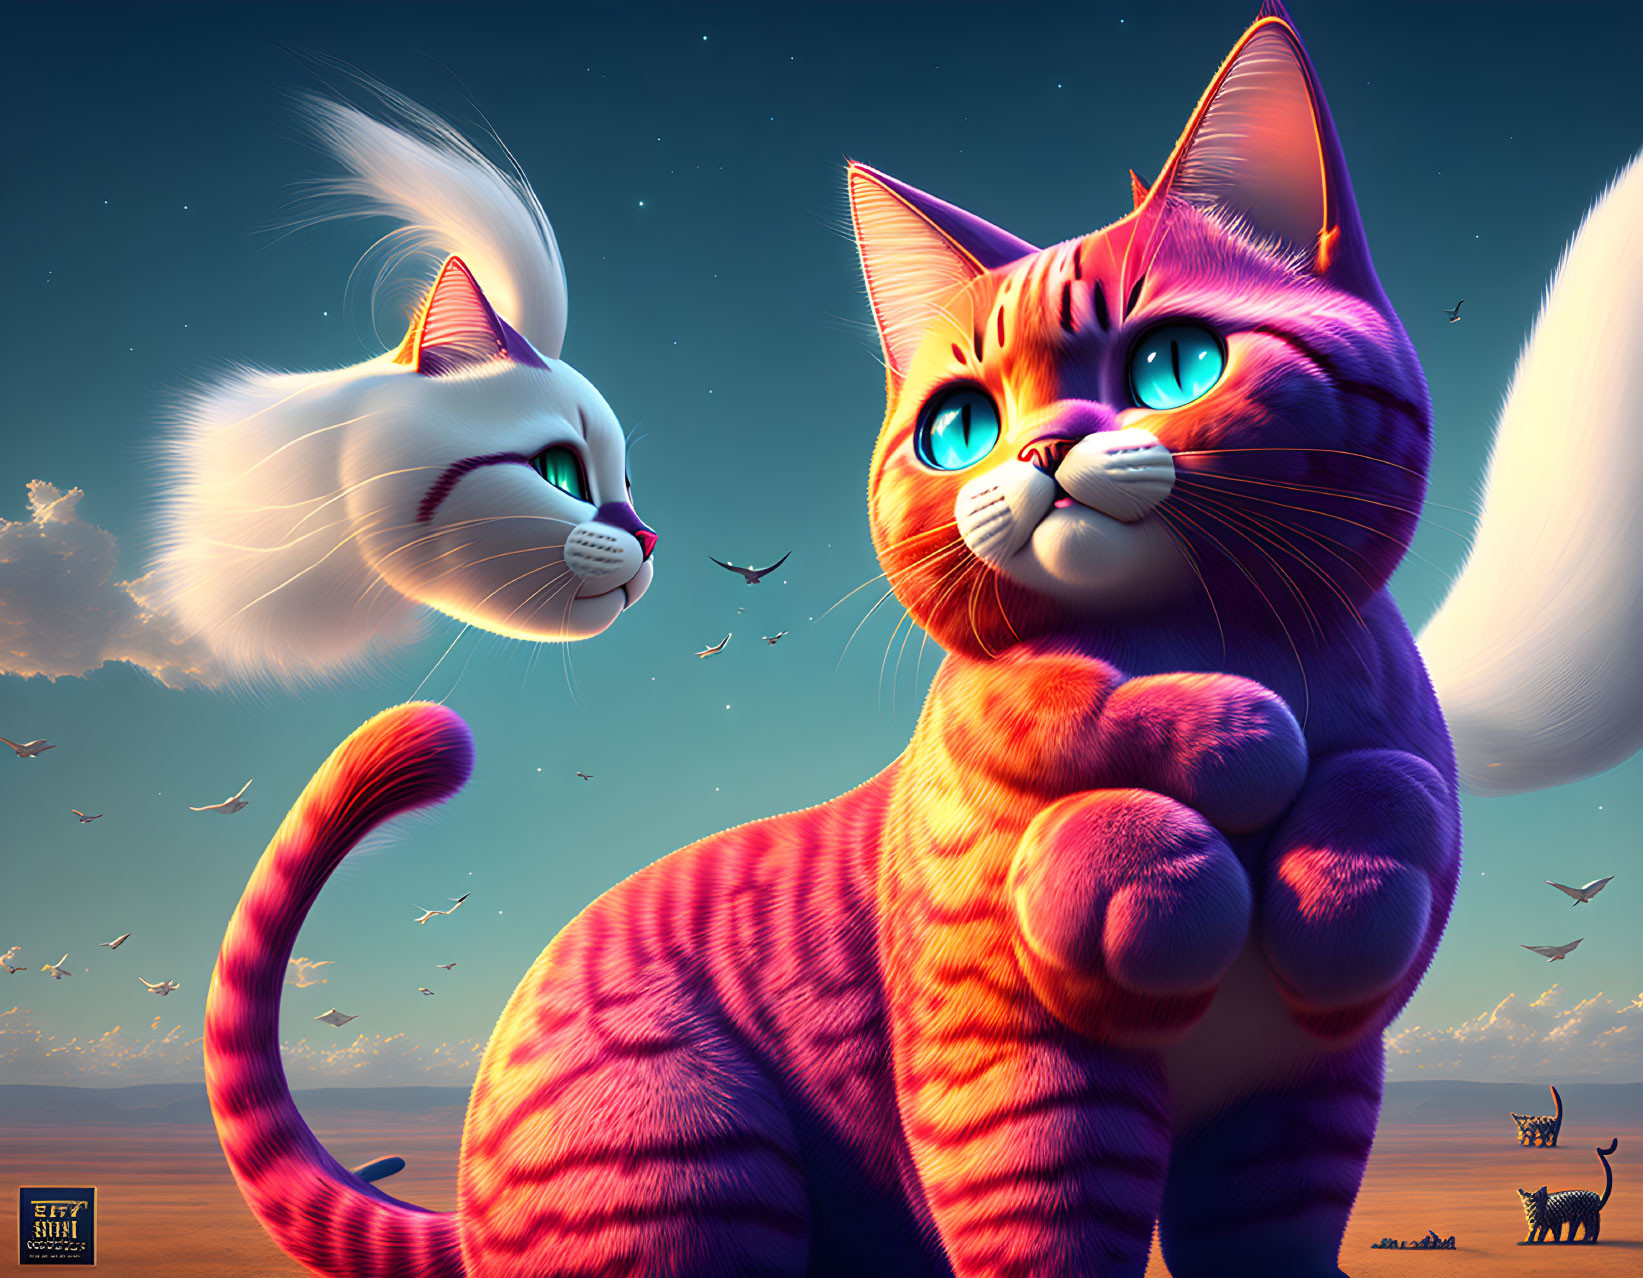 Stylized cats with blue eyes against sunset sky